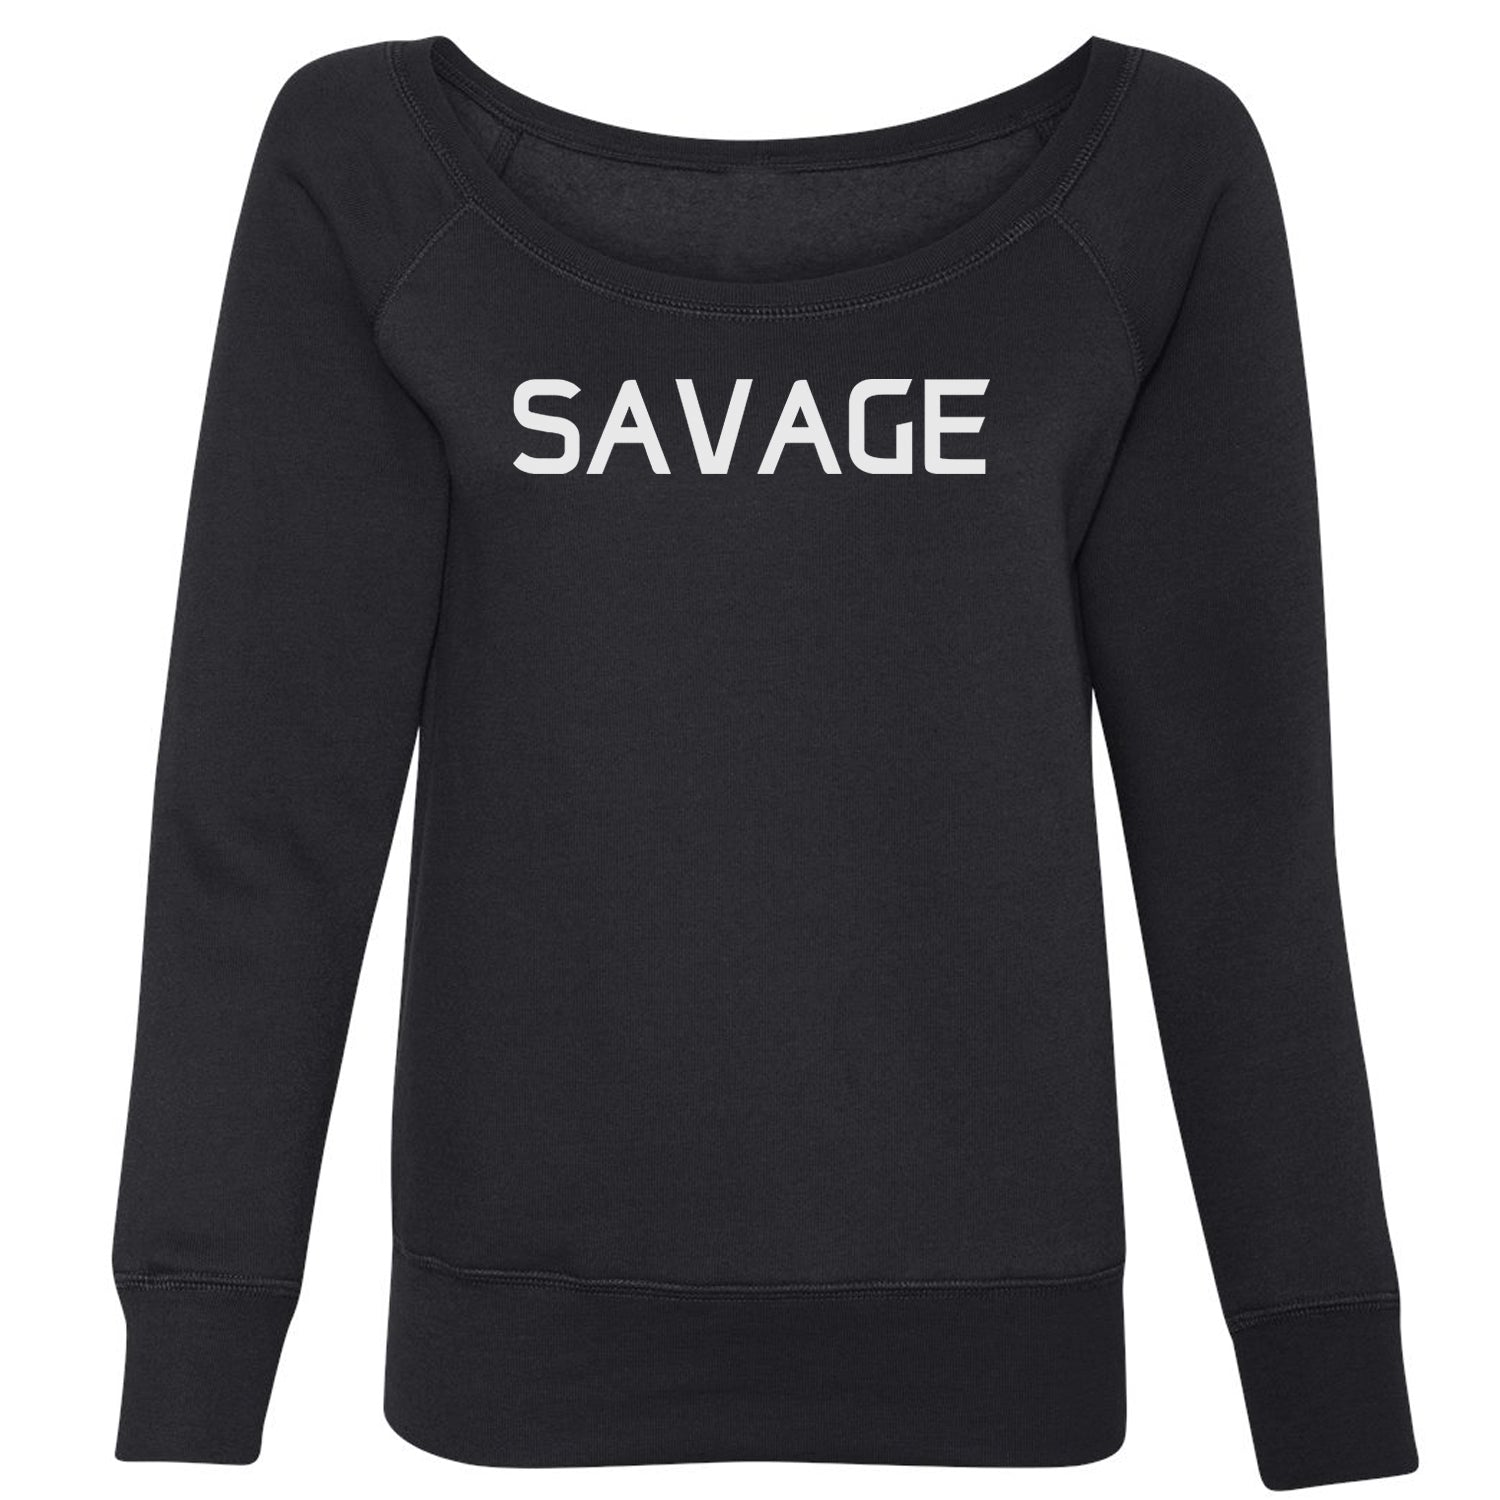 Savage Slouchy Off Shoulder Oversized Sweatshirt #expressiontees by Expression Tees